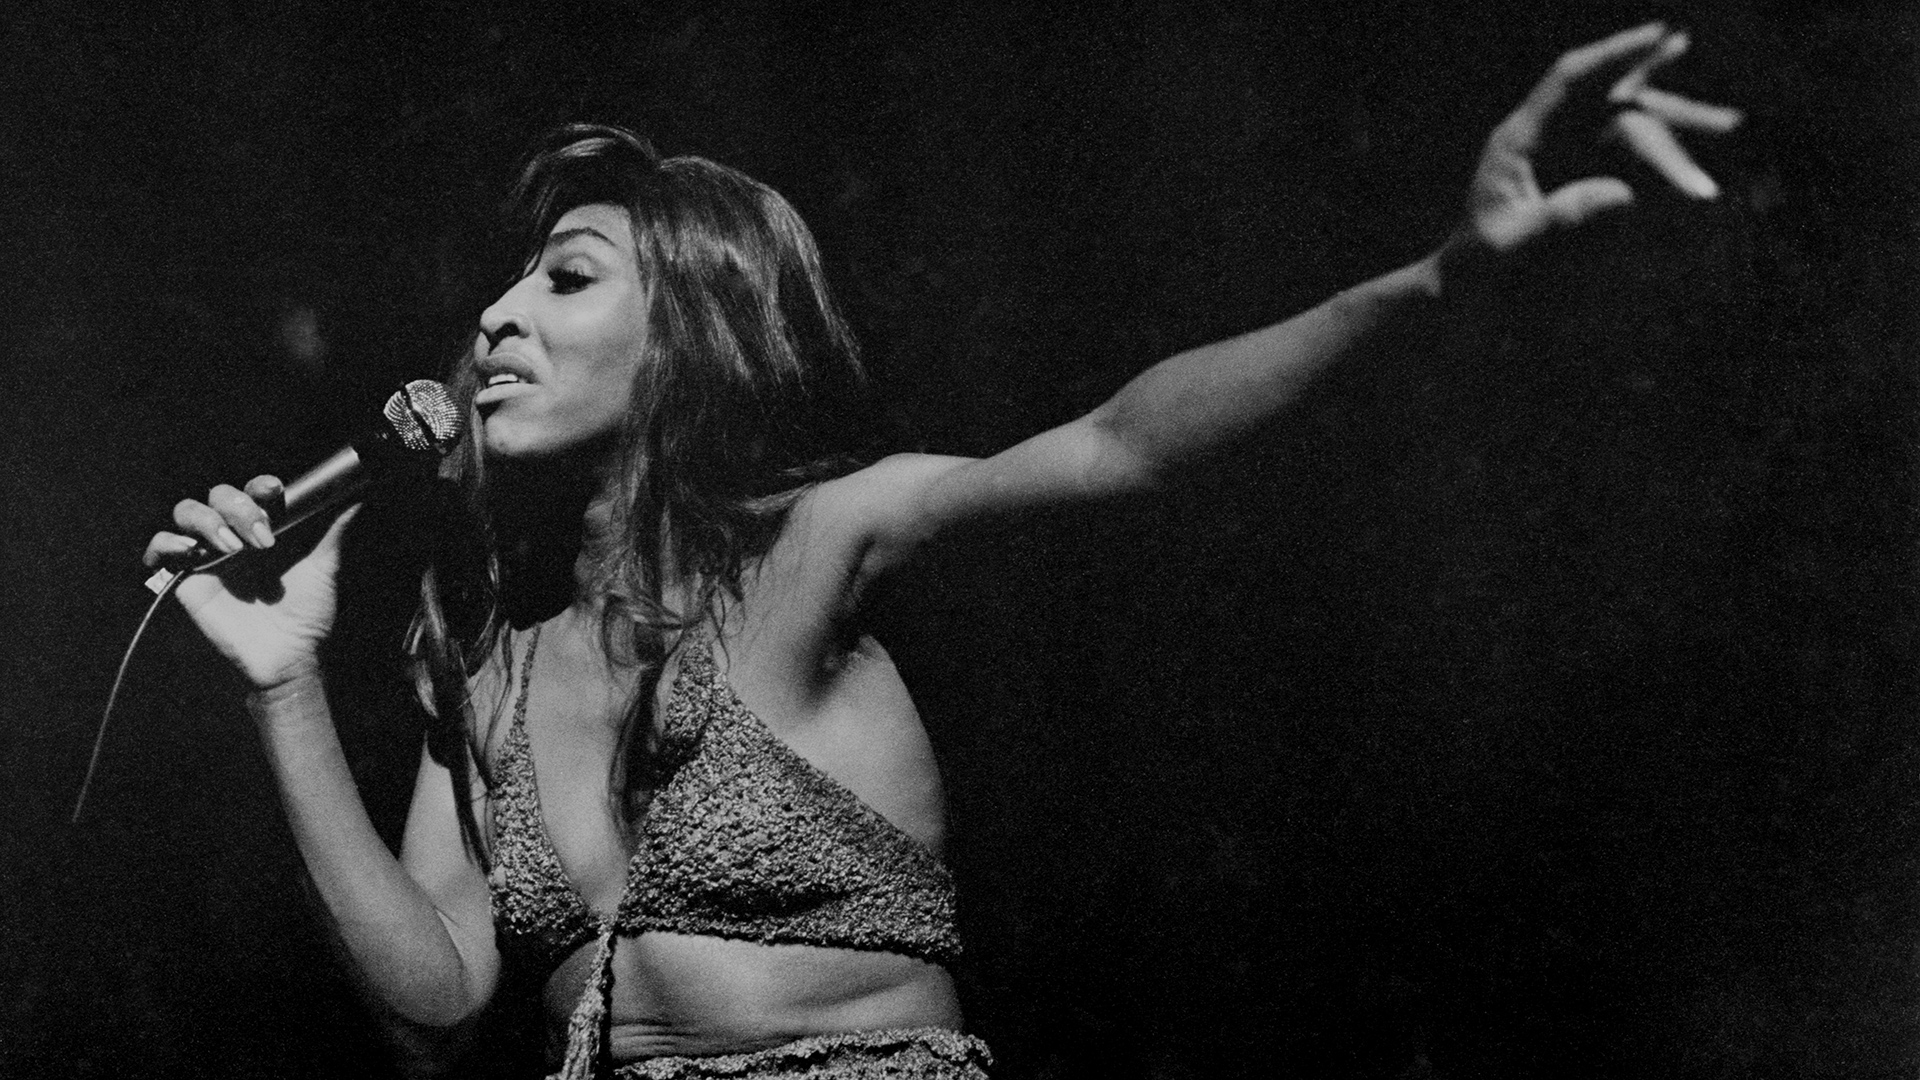 In this never-before-published photograph, Tina Turner performs at New York City's Electric Circus in 1969.